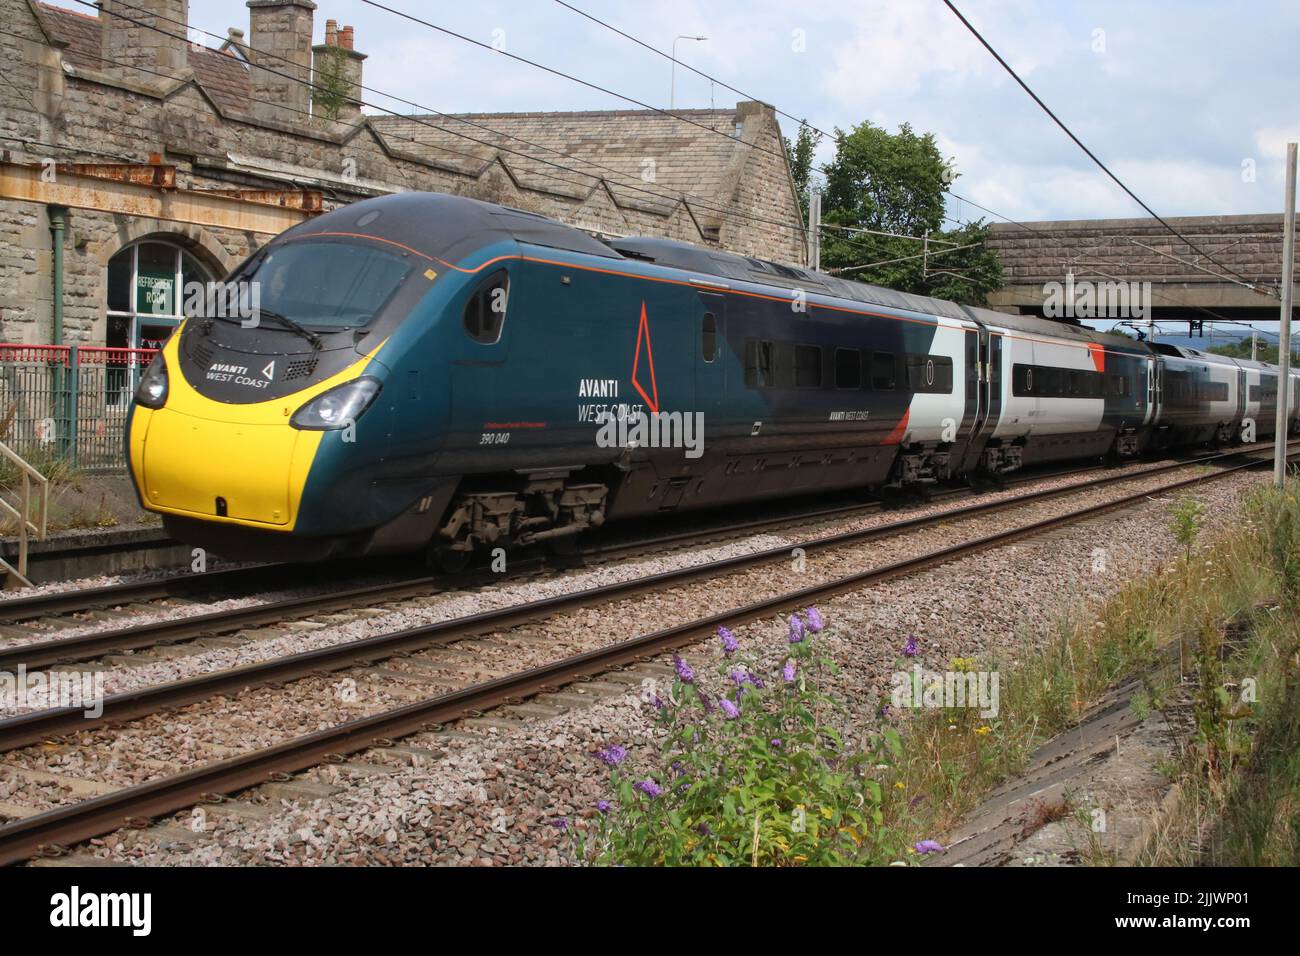 Avanti West Coast pendolino, class 390, 390040, at Carnforth on West Coast Main Line on Wednesday 27th July 2022 with London to Glasgow train. Stock Photo